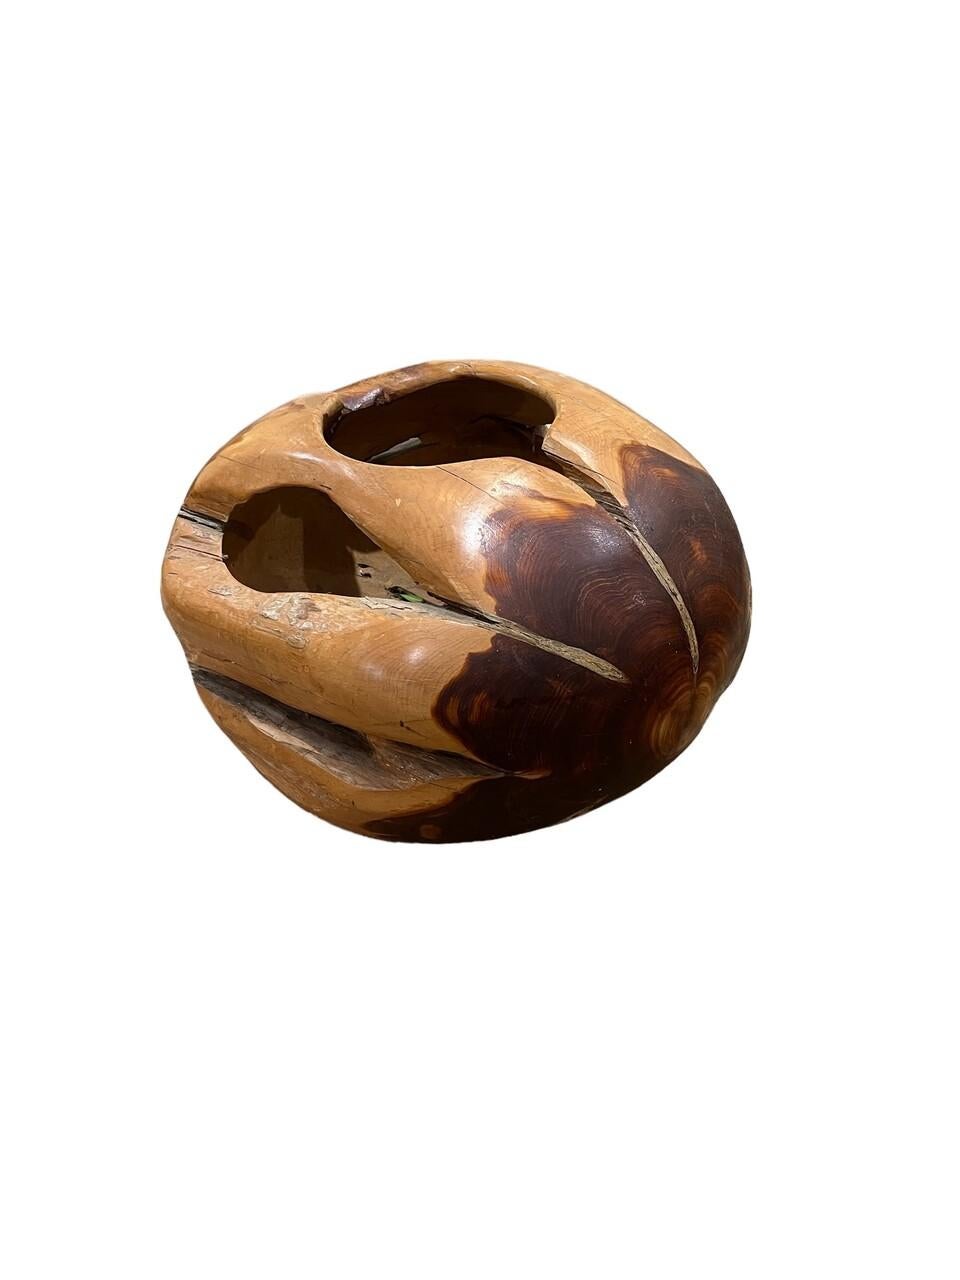 Experience the exquisite craftsmanship of this large hand-carved burl root sphere sculpture. Each curve and contour of the burl wood has been meticulously shaped and polished to perfection, revealing the natural beauty and unique grain patterns